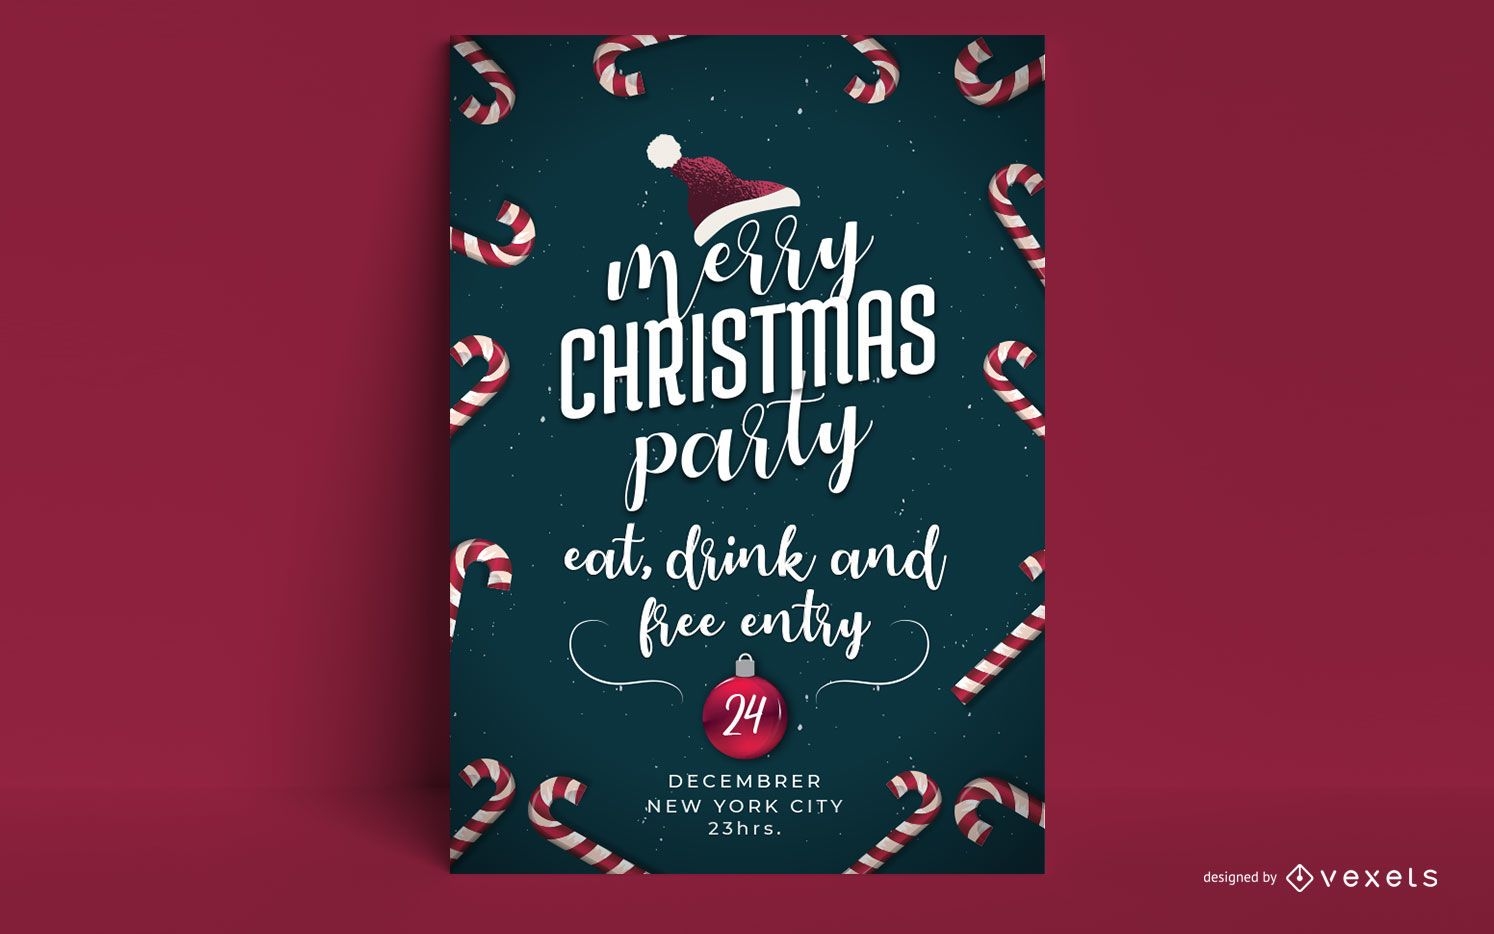 Merry Christmas Party Invitation Design